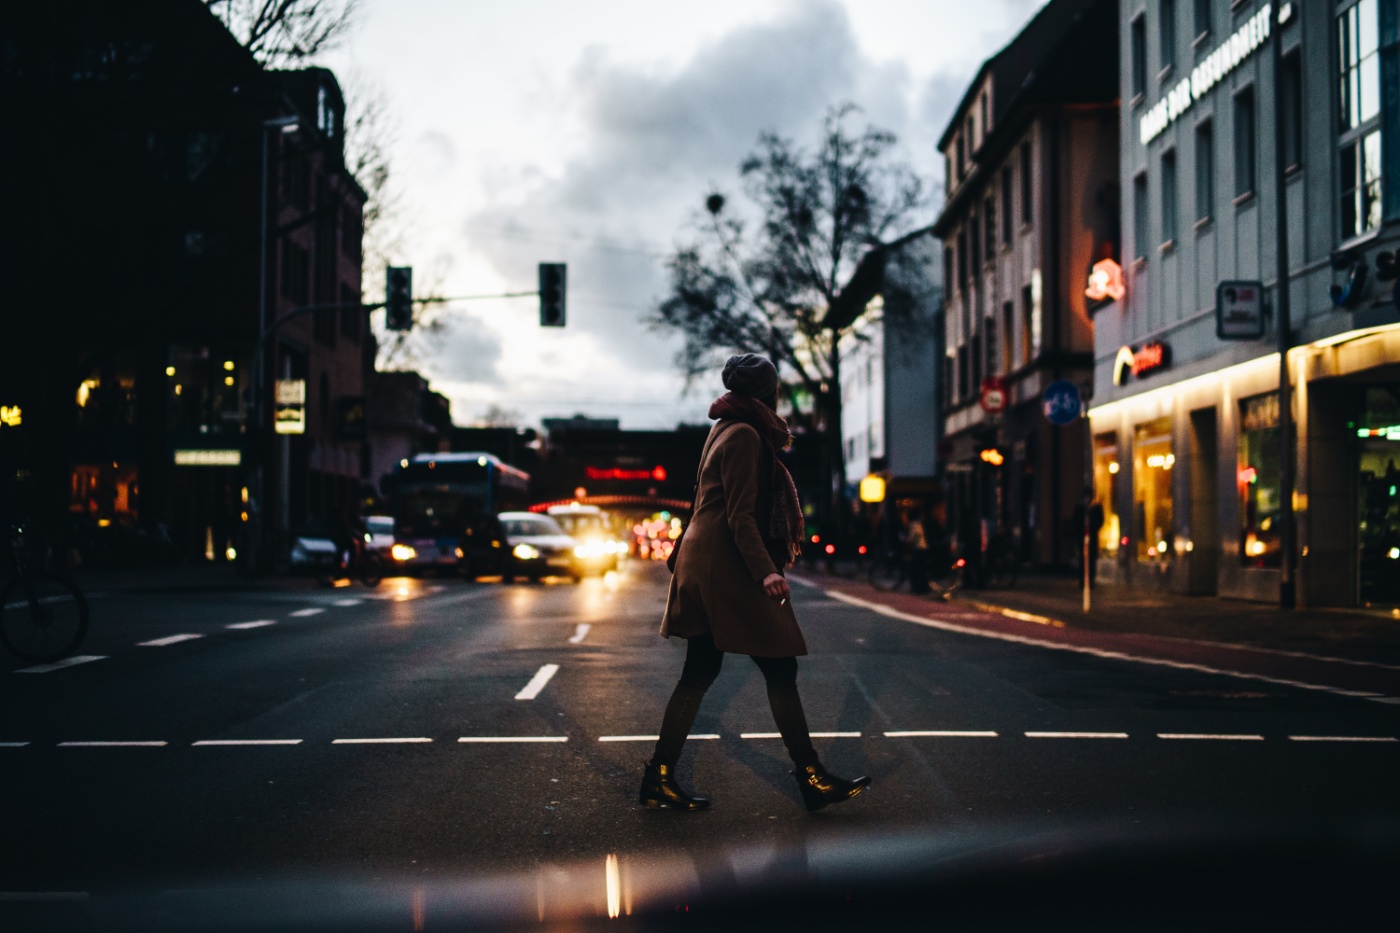 Intelligent traffic systems can be used to set longer green phases for pedestrians at certain times of the day. Photo: Rodan Can / Unsplash